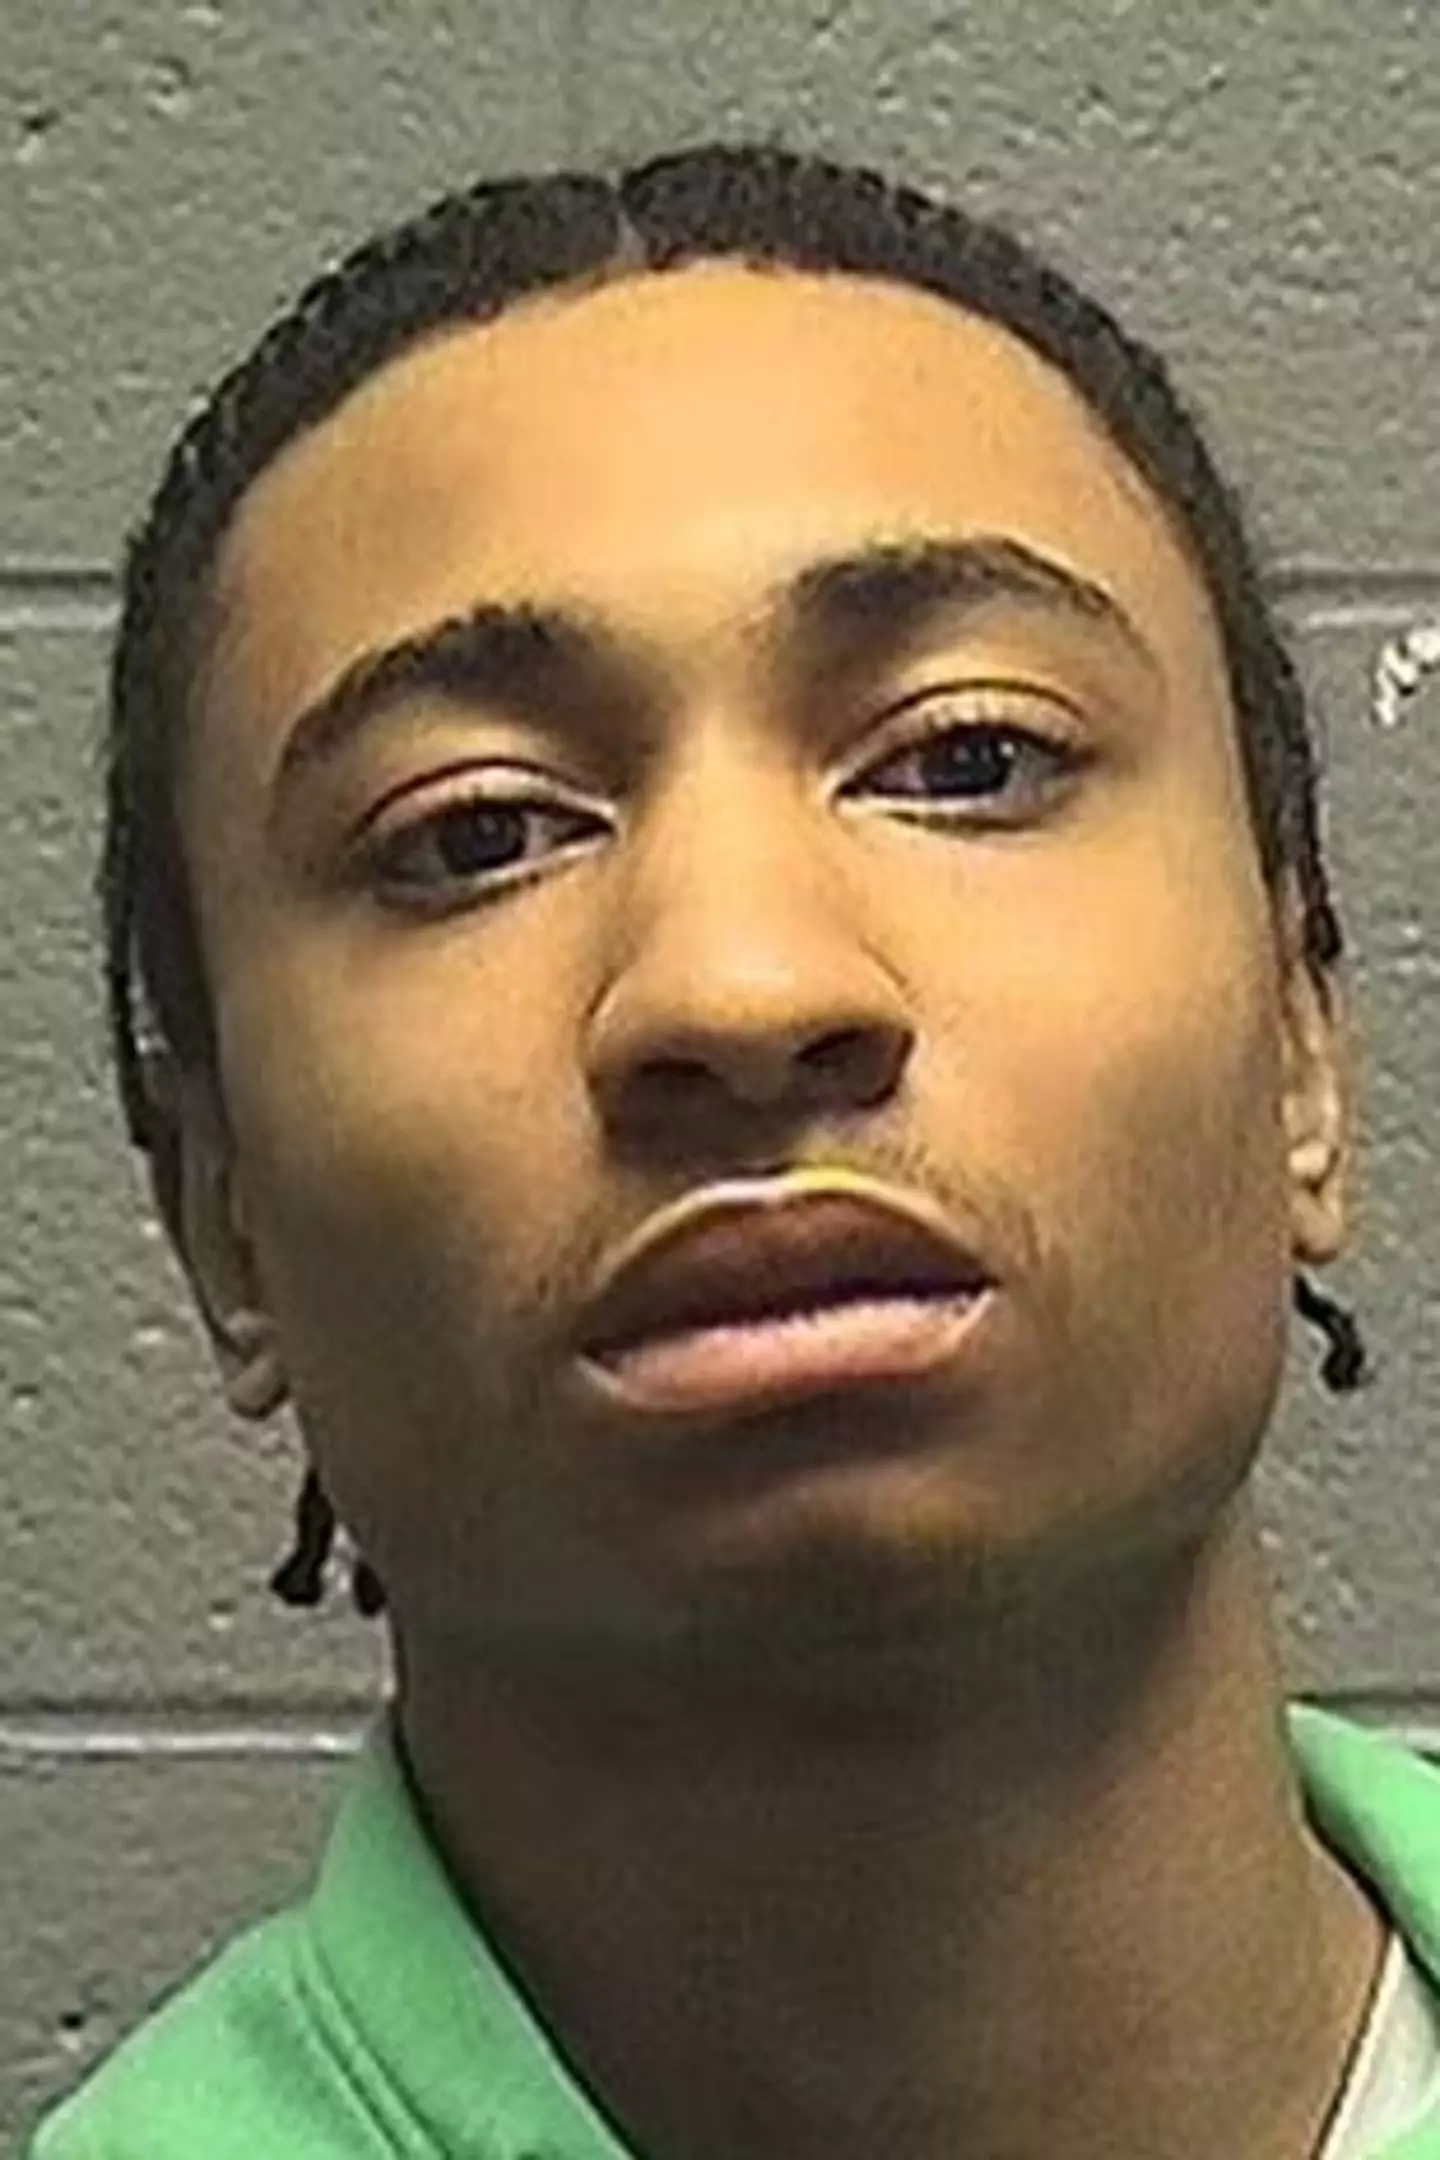 Headshot of suspect in Chicago armed train robbery named Zion Brown. (Police handout) 